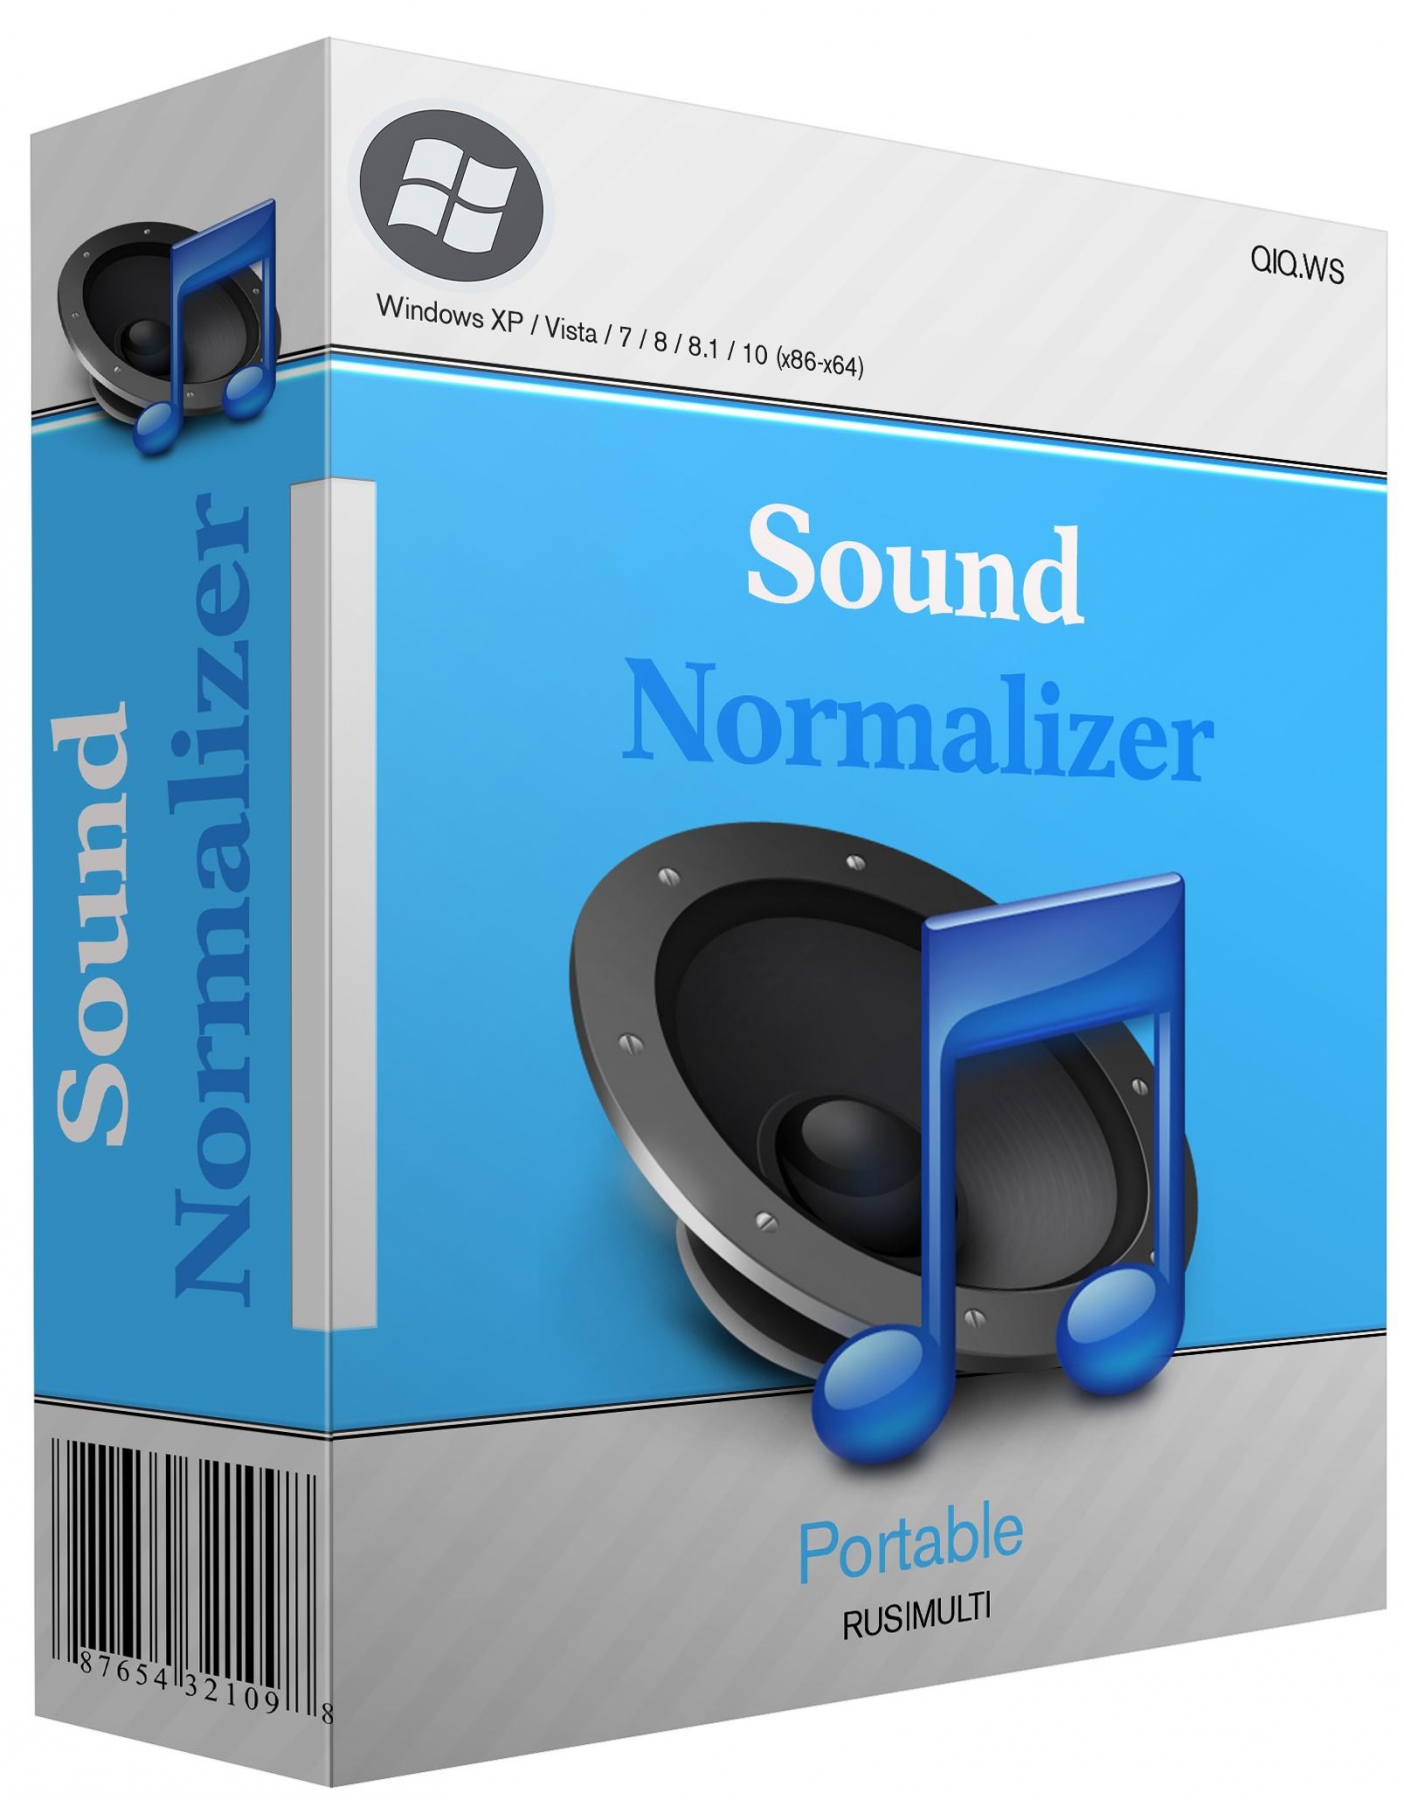 sound normalizer bad for gaming